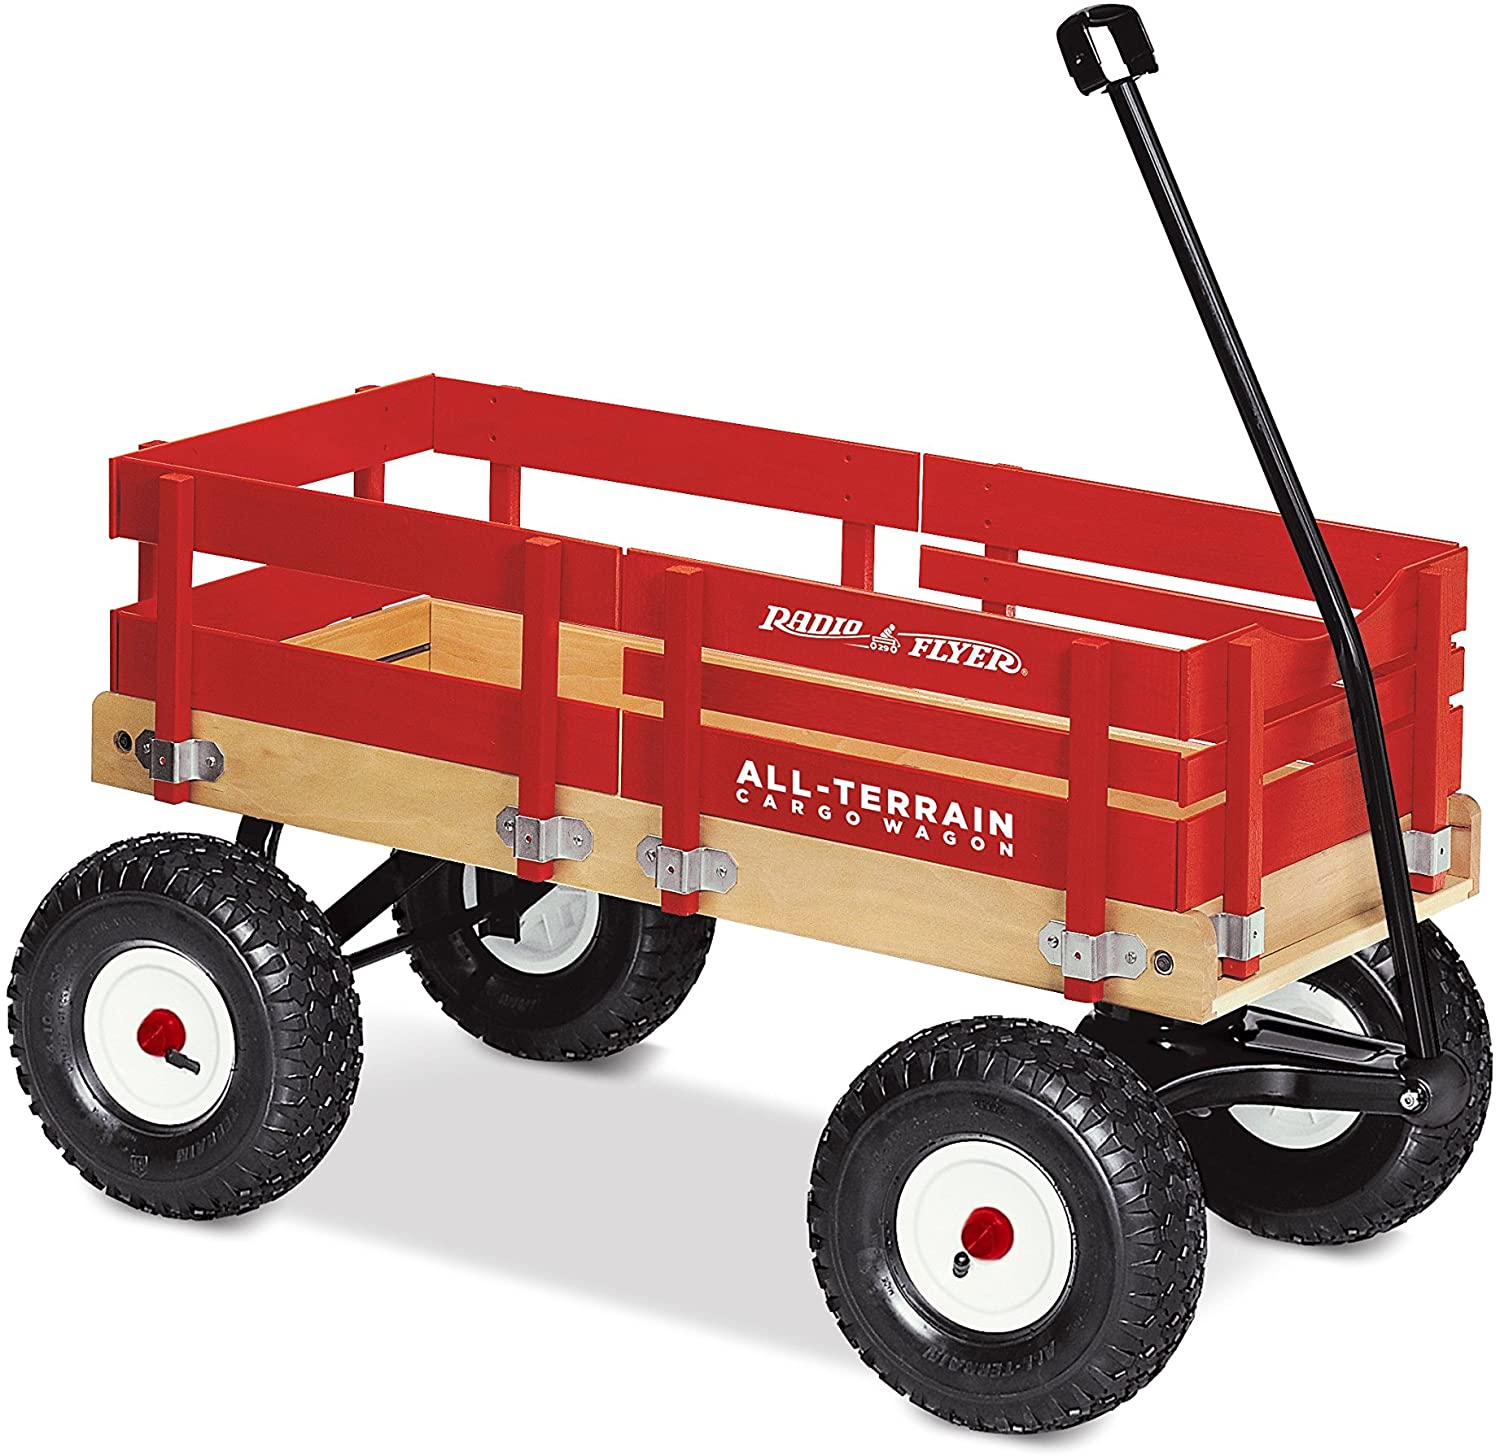 Radio Flyer Smooth Ride Wooden Wagon For Kids